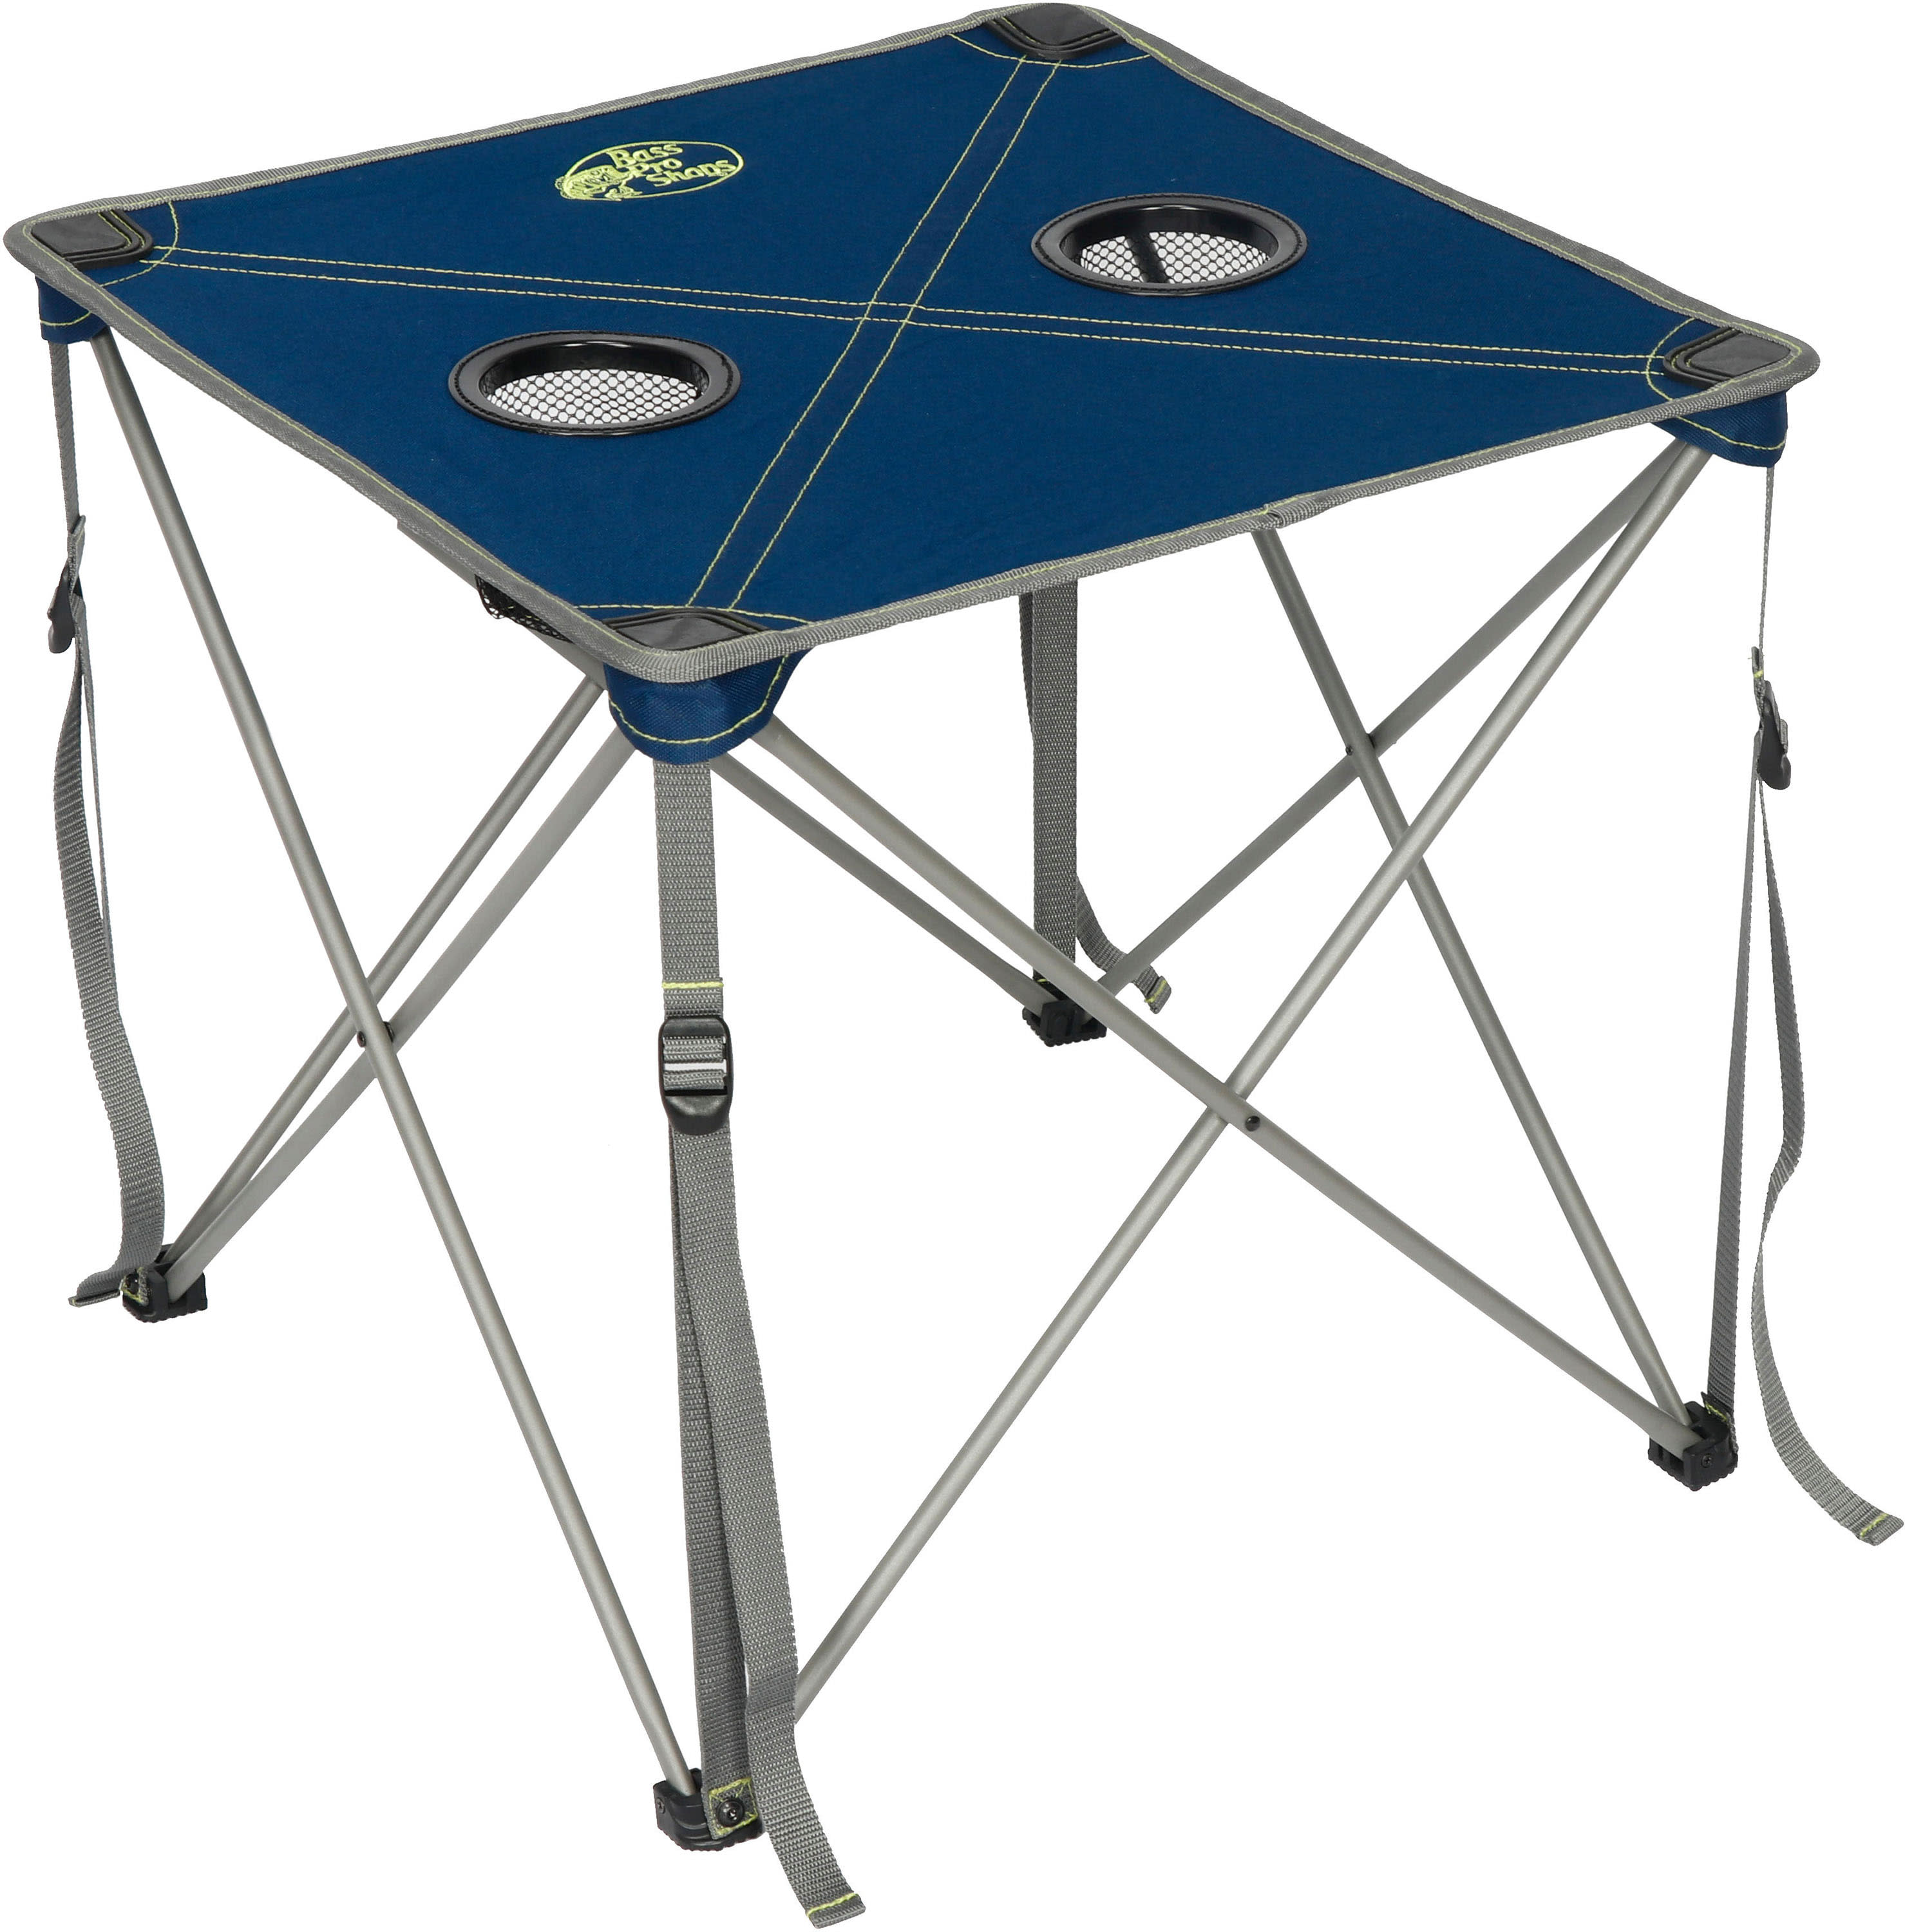 Bass Pro Shops® Fabric Table 